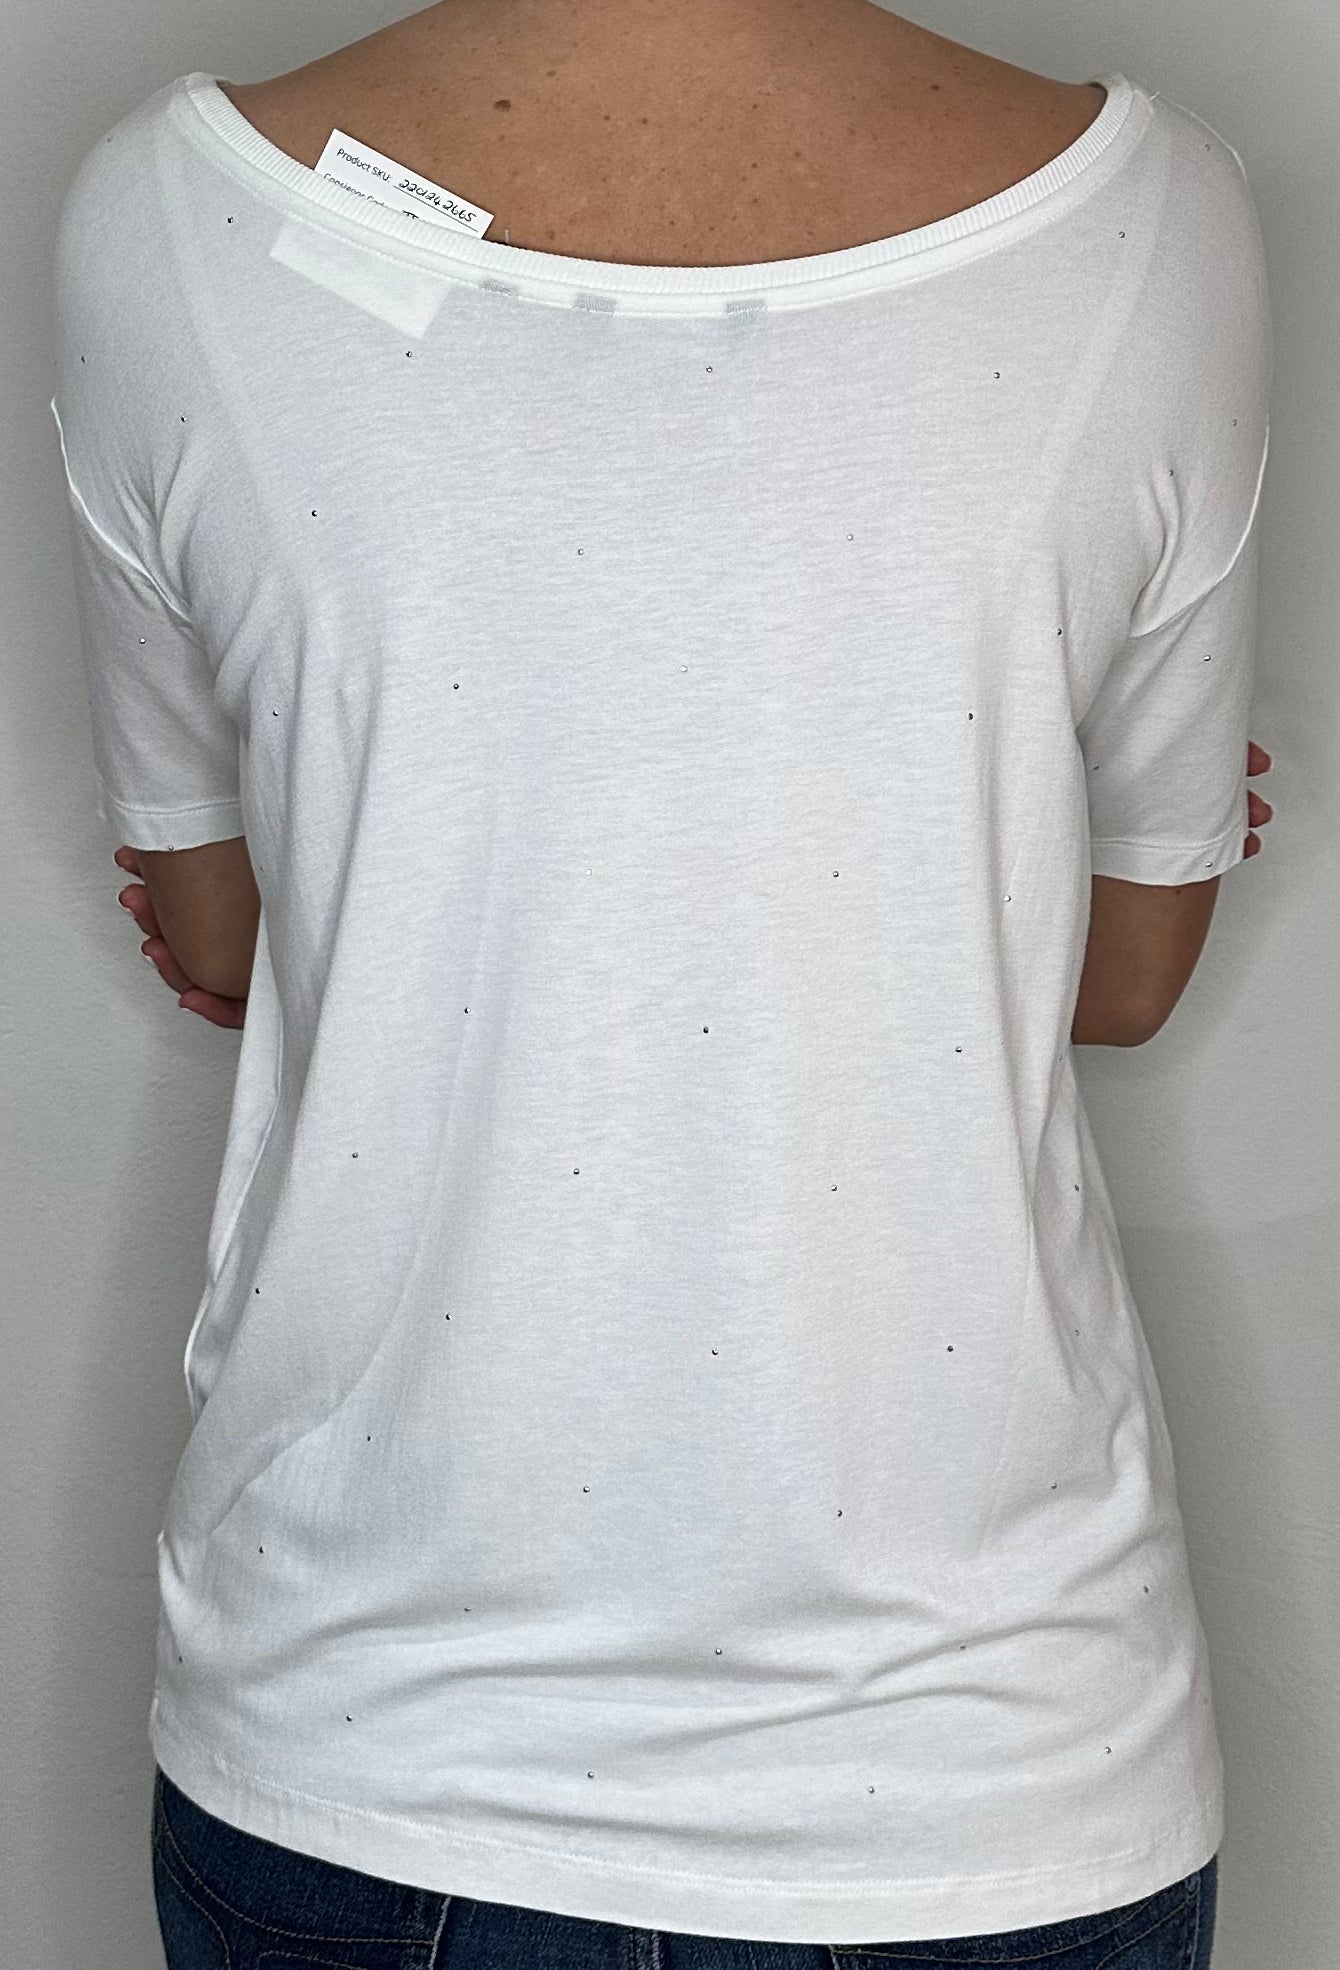 Next White T Shirt with Rose Gold Studs - Size 6P TS: 12